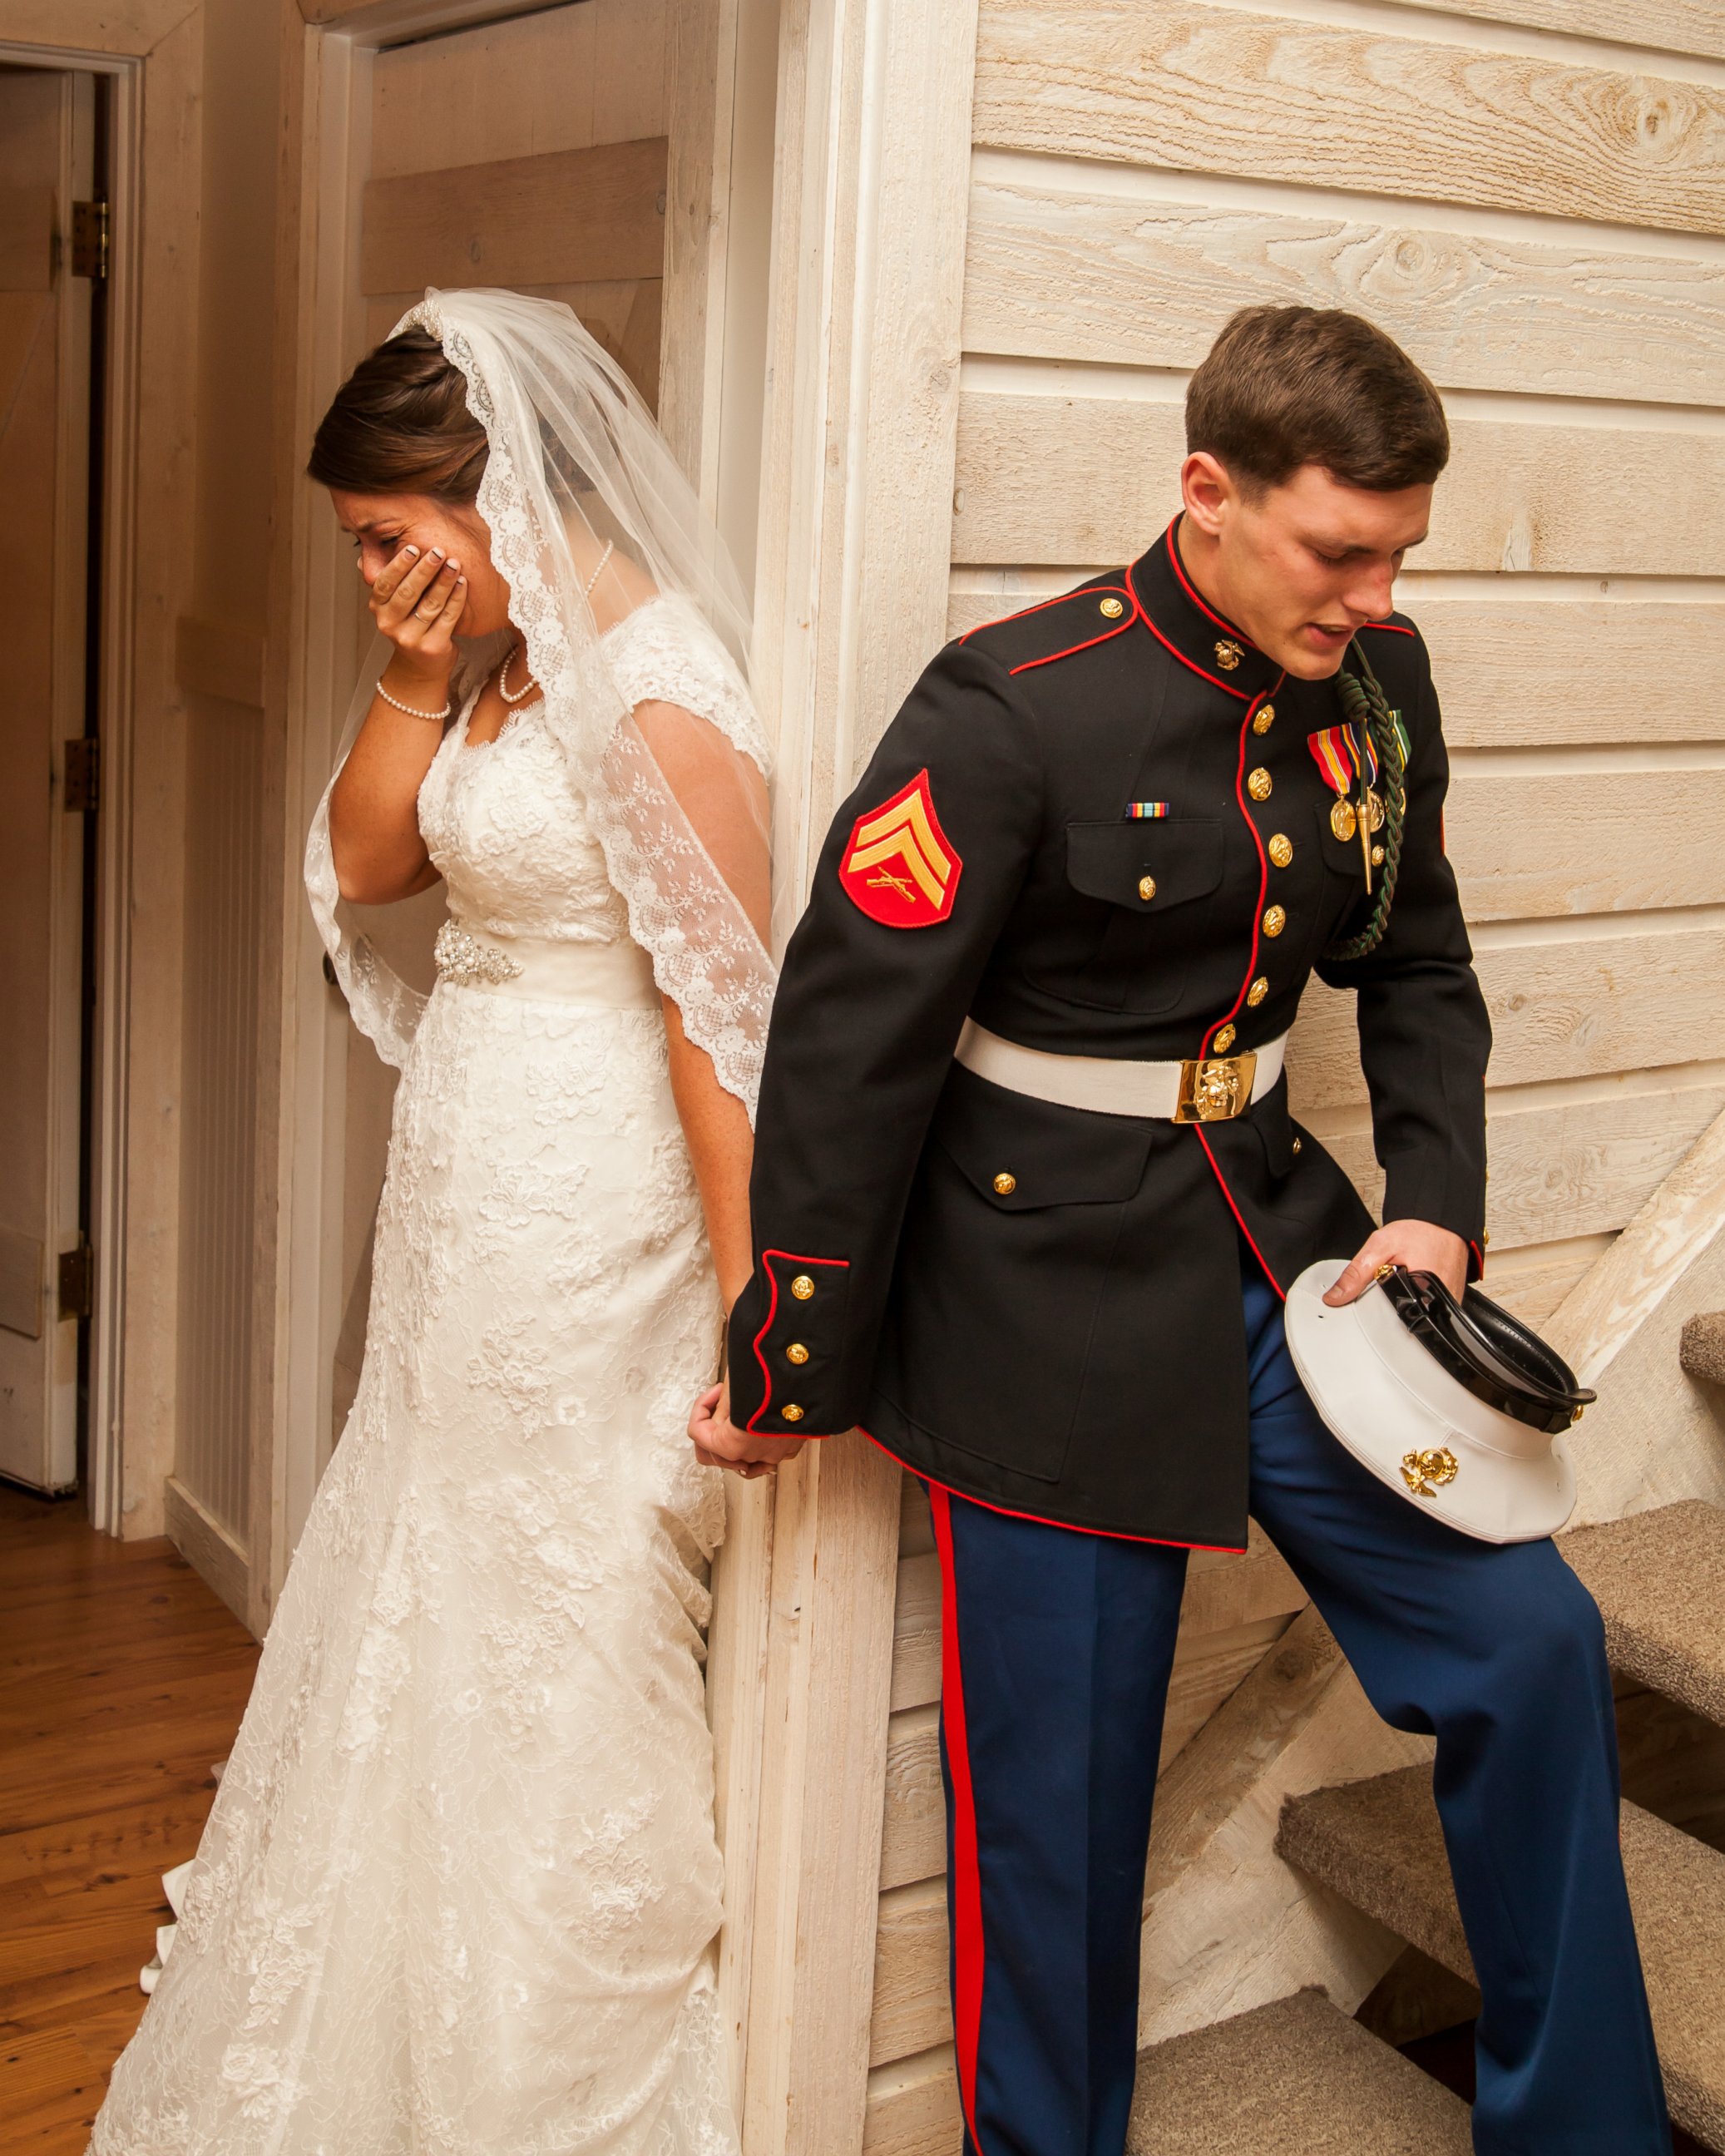 PHOTO: U.S. Marine Cpl. Caleb Earwood prays with his bride-to-be Maggie before their wedding service on Saturday in Asheville, North Carolina.